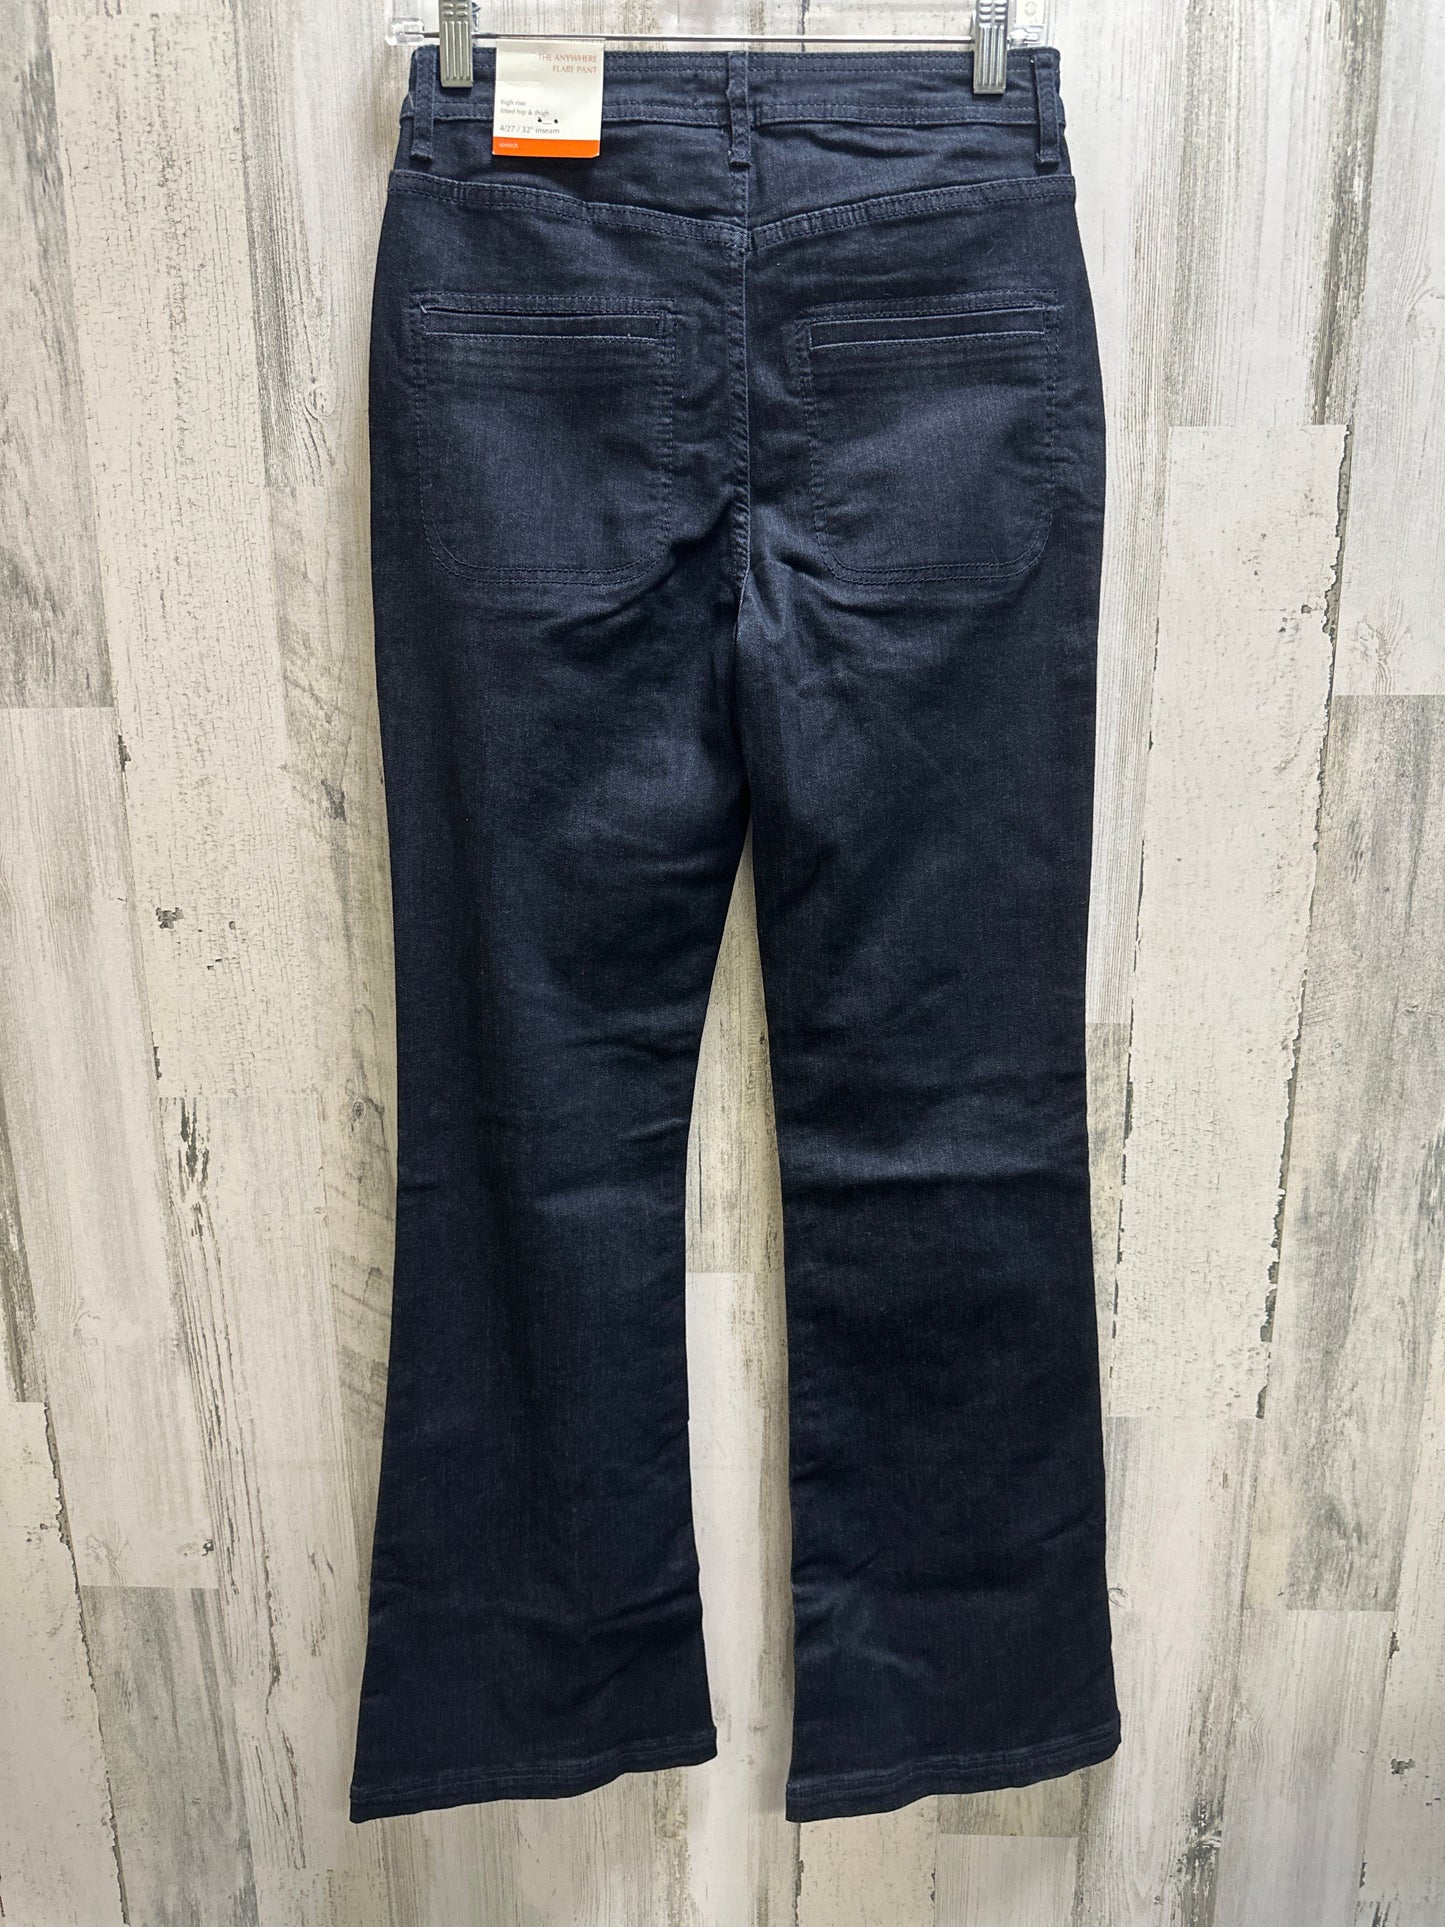 Jeans Flared By Knox Rose  Size: 4